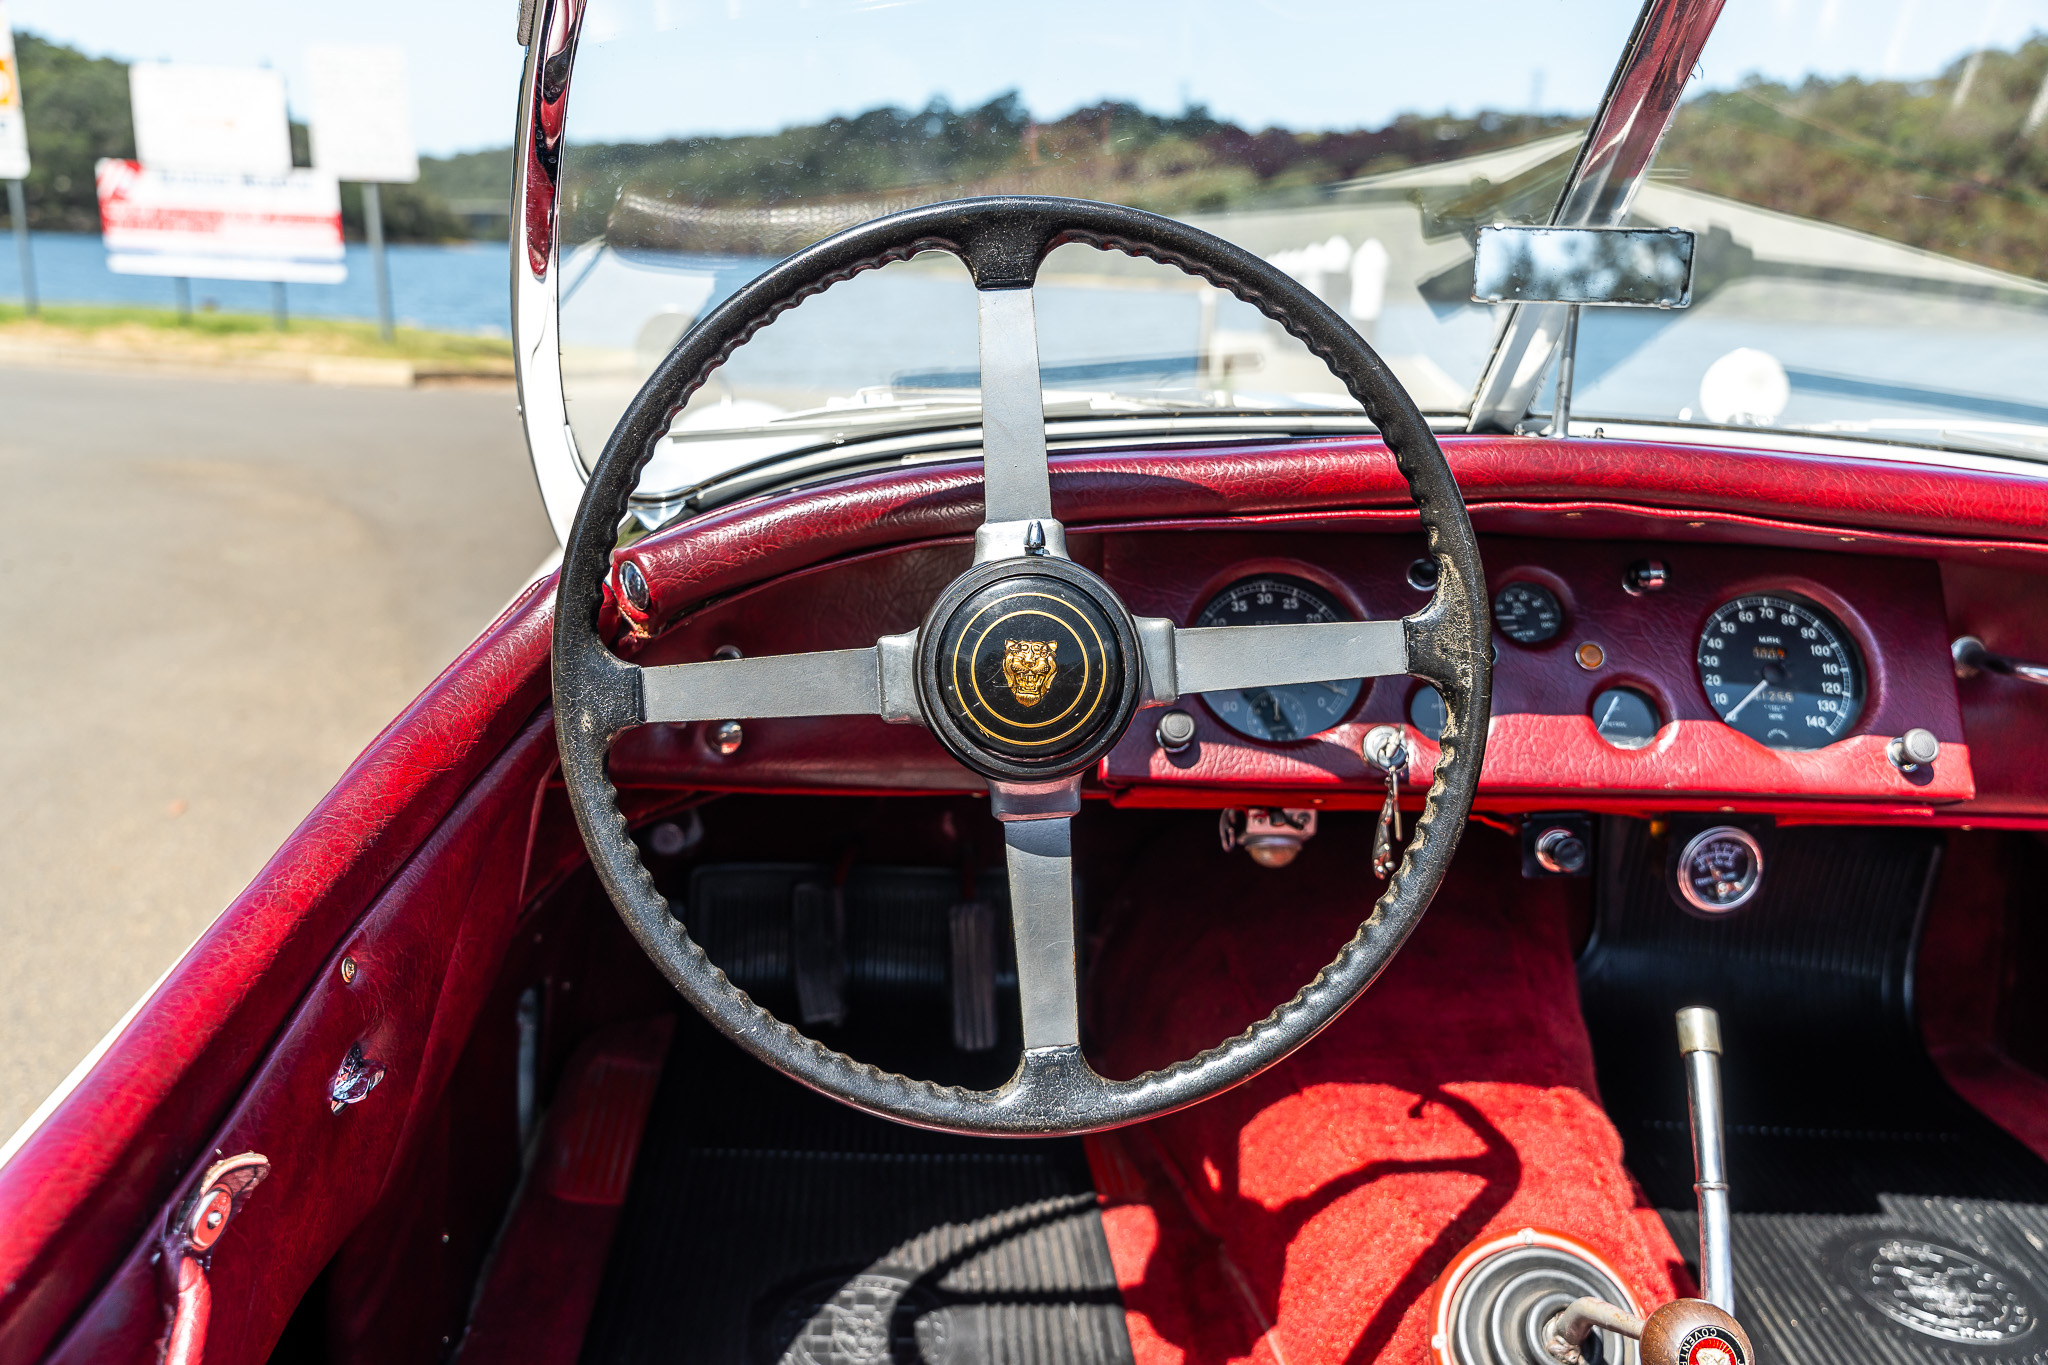 1954 Jaguar XK120 Roadster for sale by auction in Revesby, NSW 